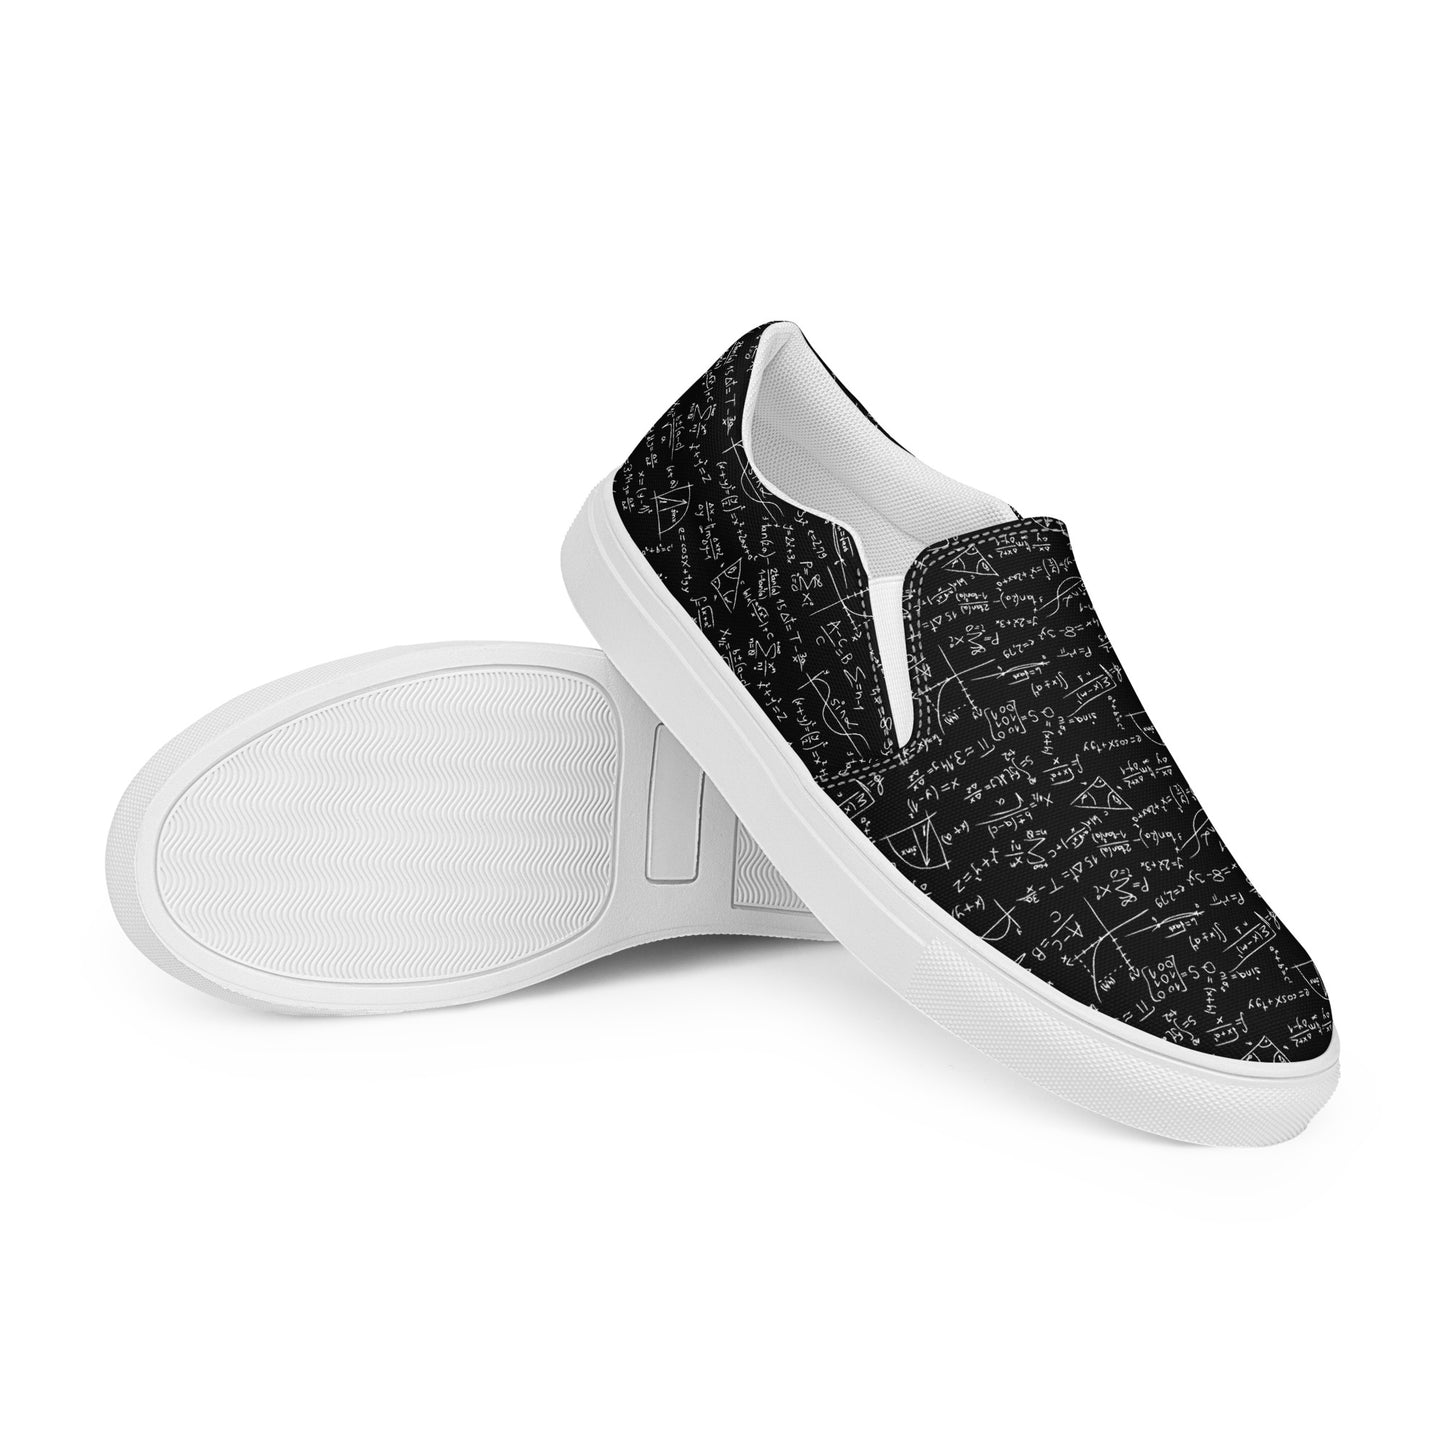 Equations - Women’s slip-on canvas shoes Womens Slip On Shoes